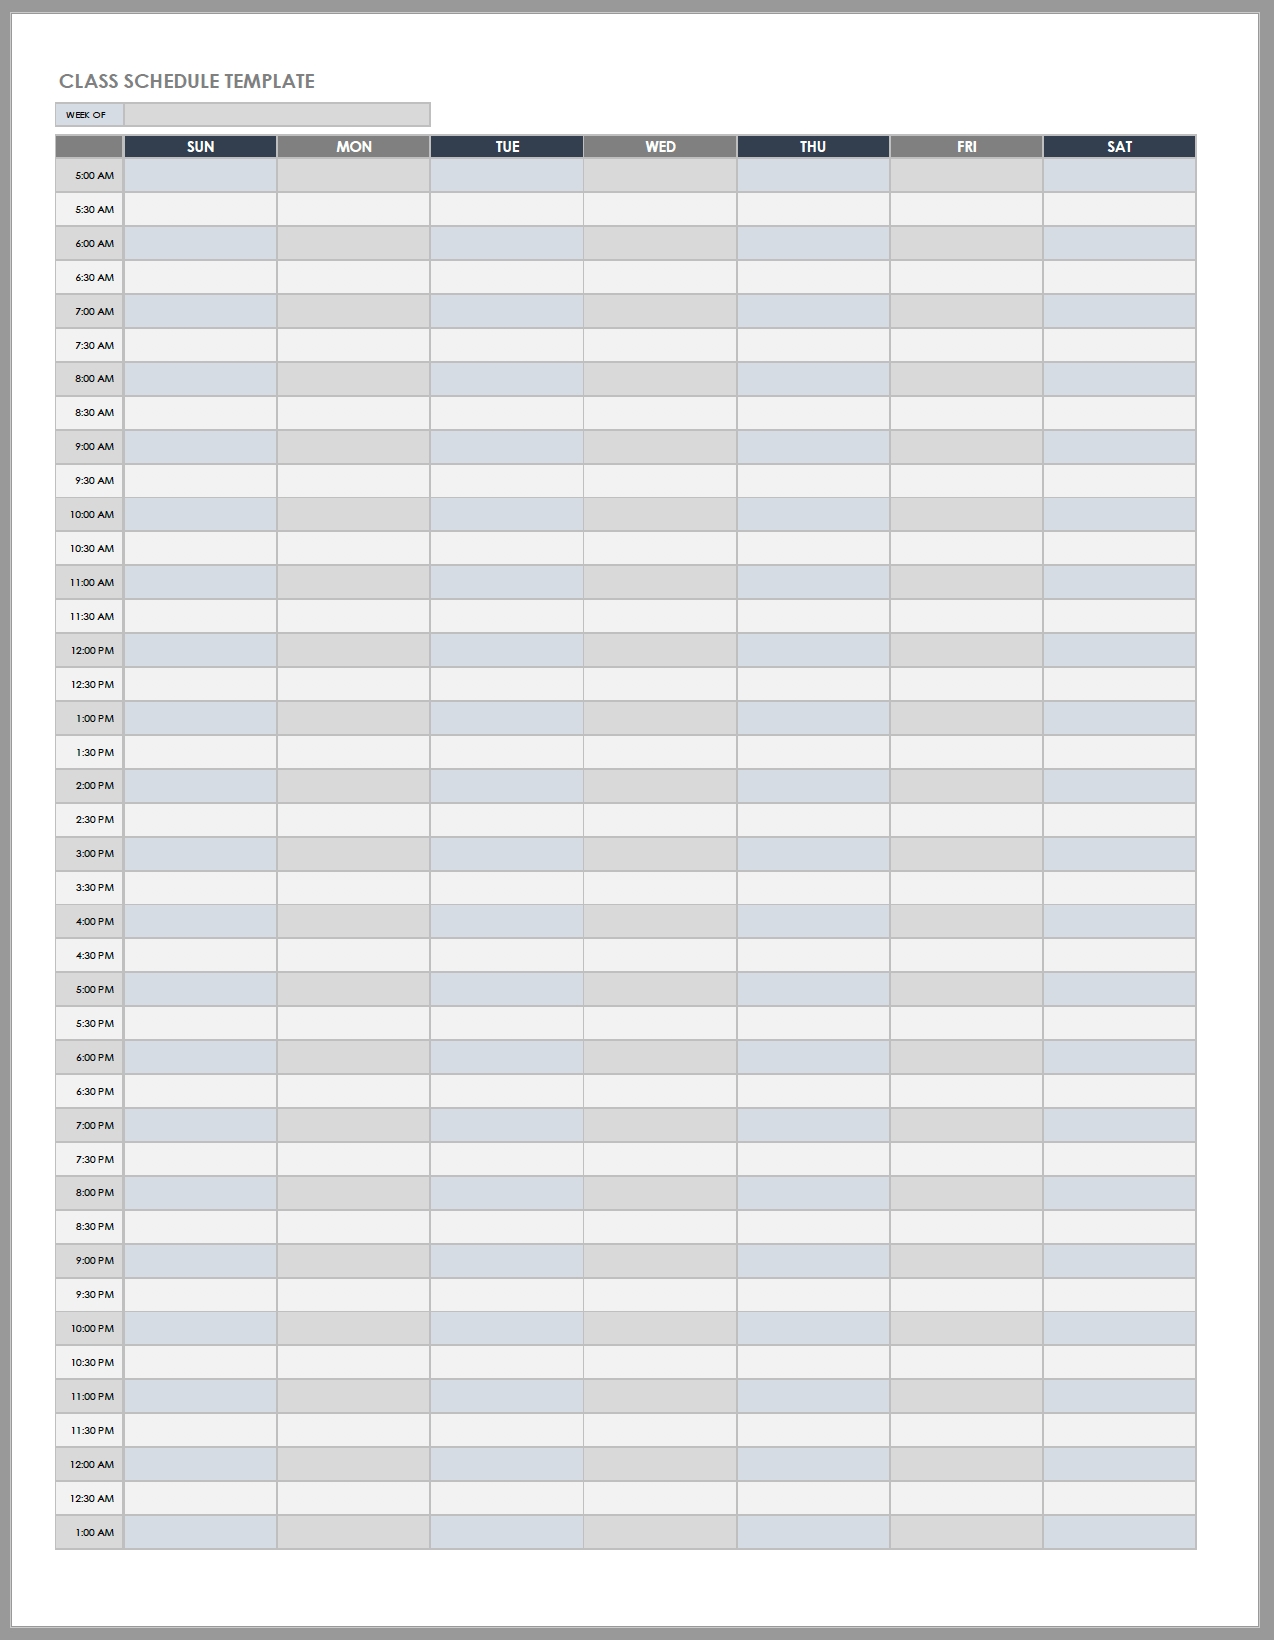 Free Daily Work Schedule Templates | Smartsheet Calendar Template By Hour